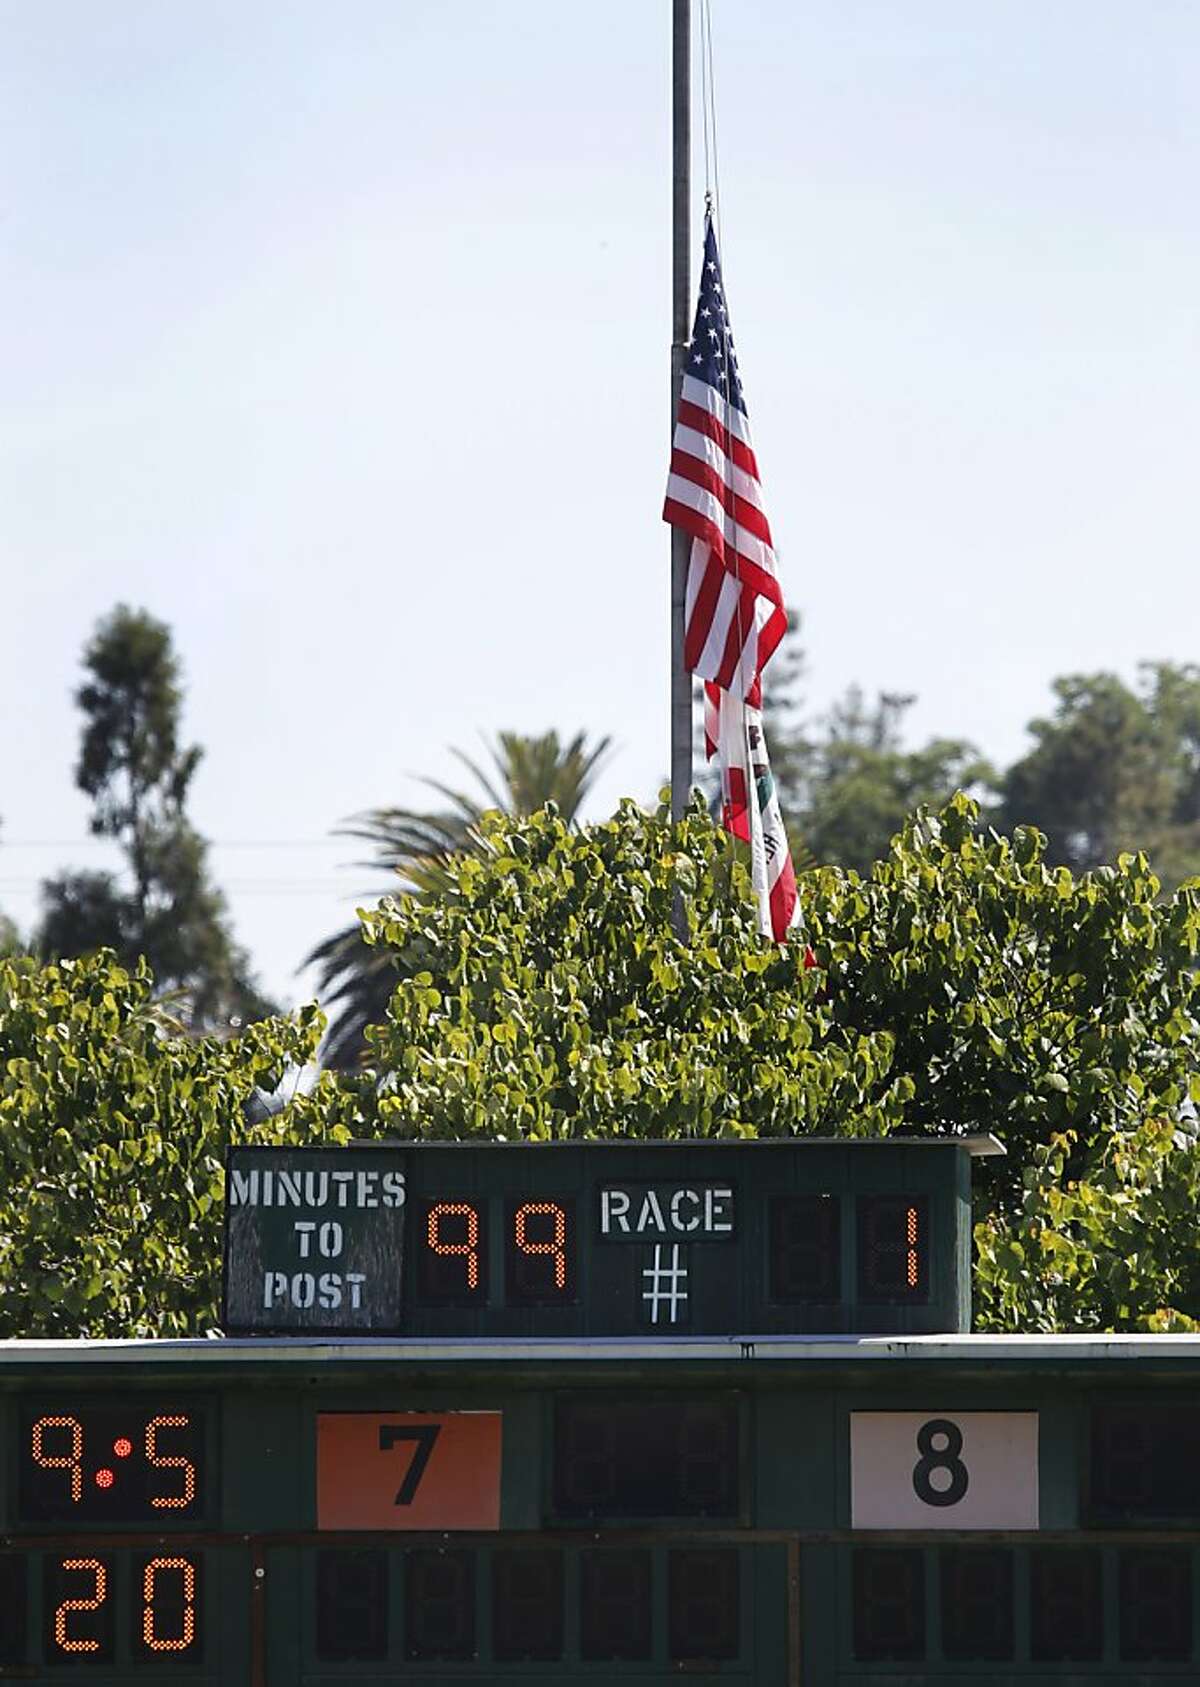 Flags are flown at half mast at the Alameda County Fair in Pleasanton, Calif. on Friday, July 6, 2012, one day after jockey Jorge Herrera died when he was thrown from Morito during the final race.